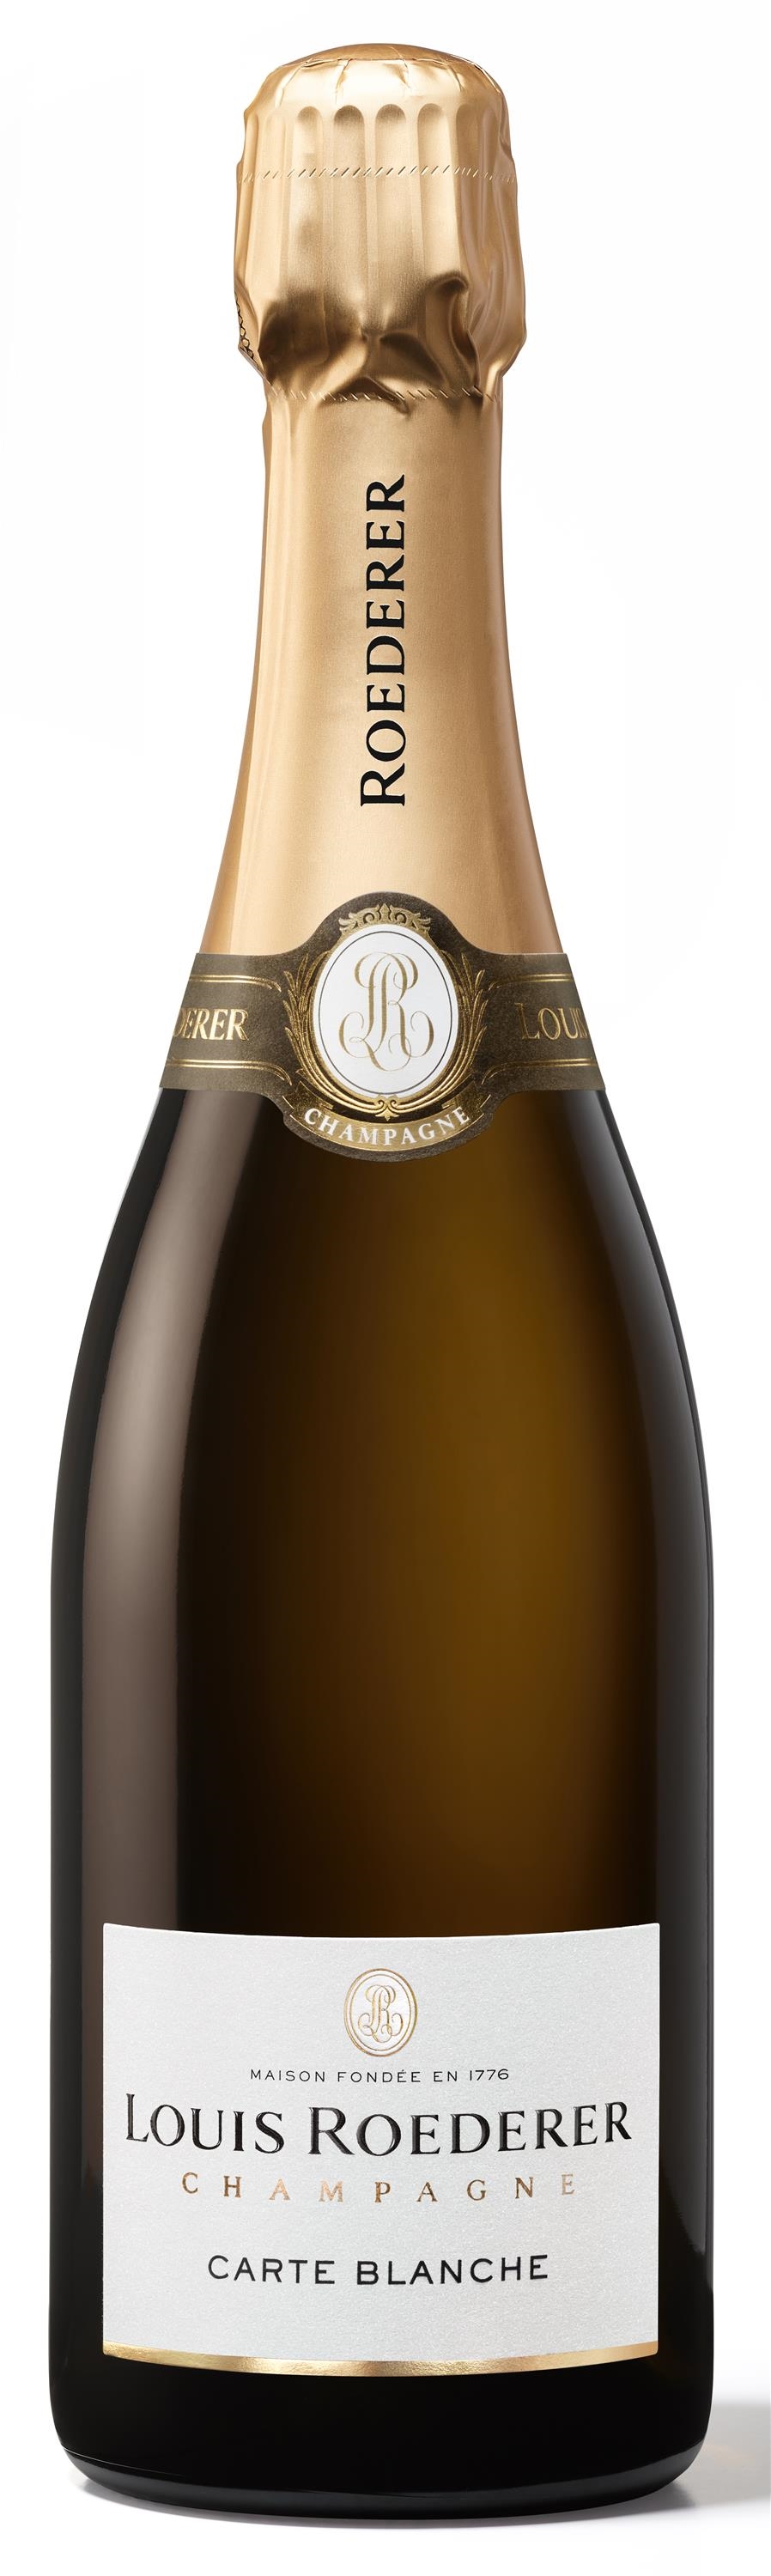 Champagne Louis Roederer Carte Blanche Collection 243, Demi-Sec